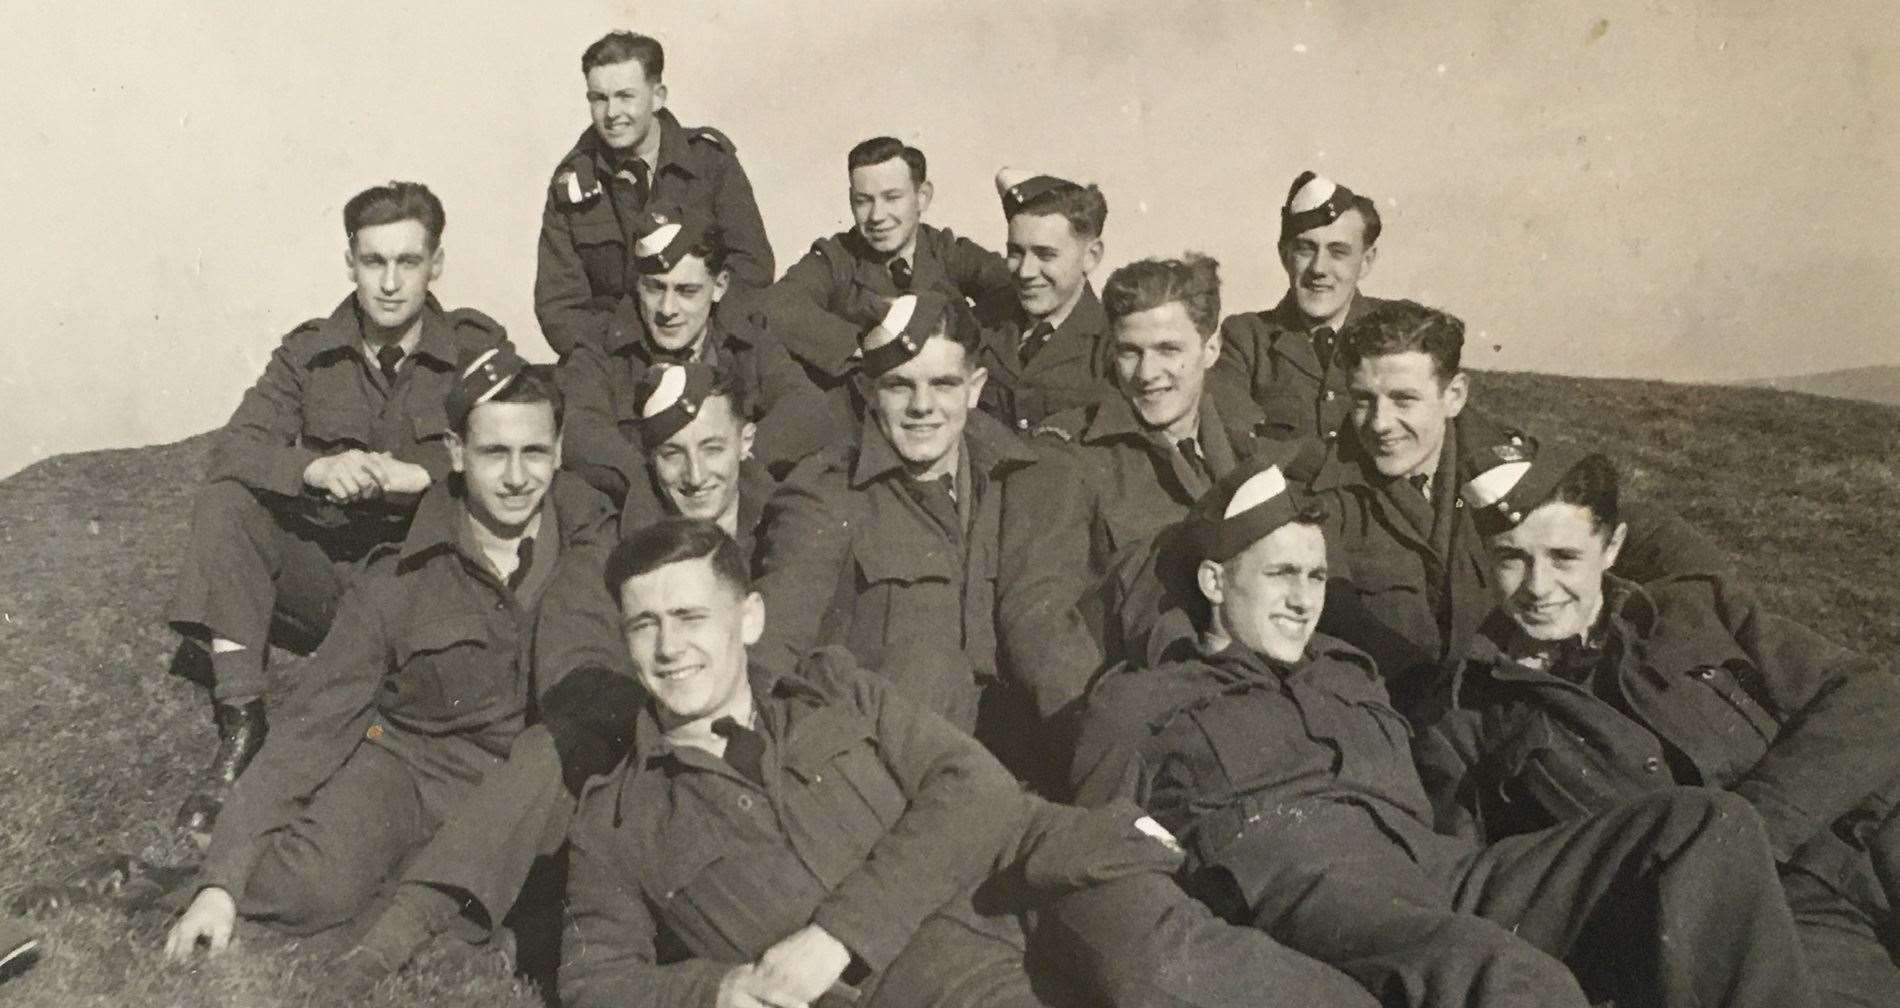 Edward and Morgan with members of the 153 Squadron